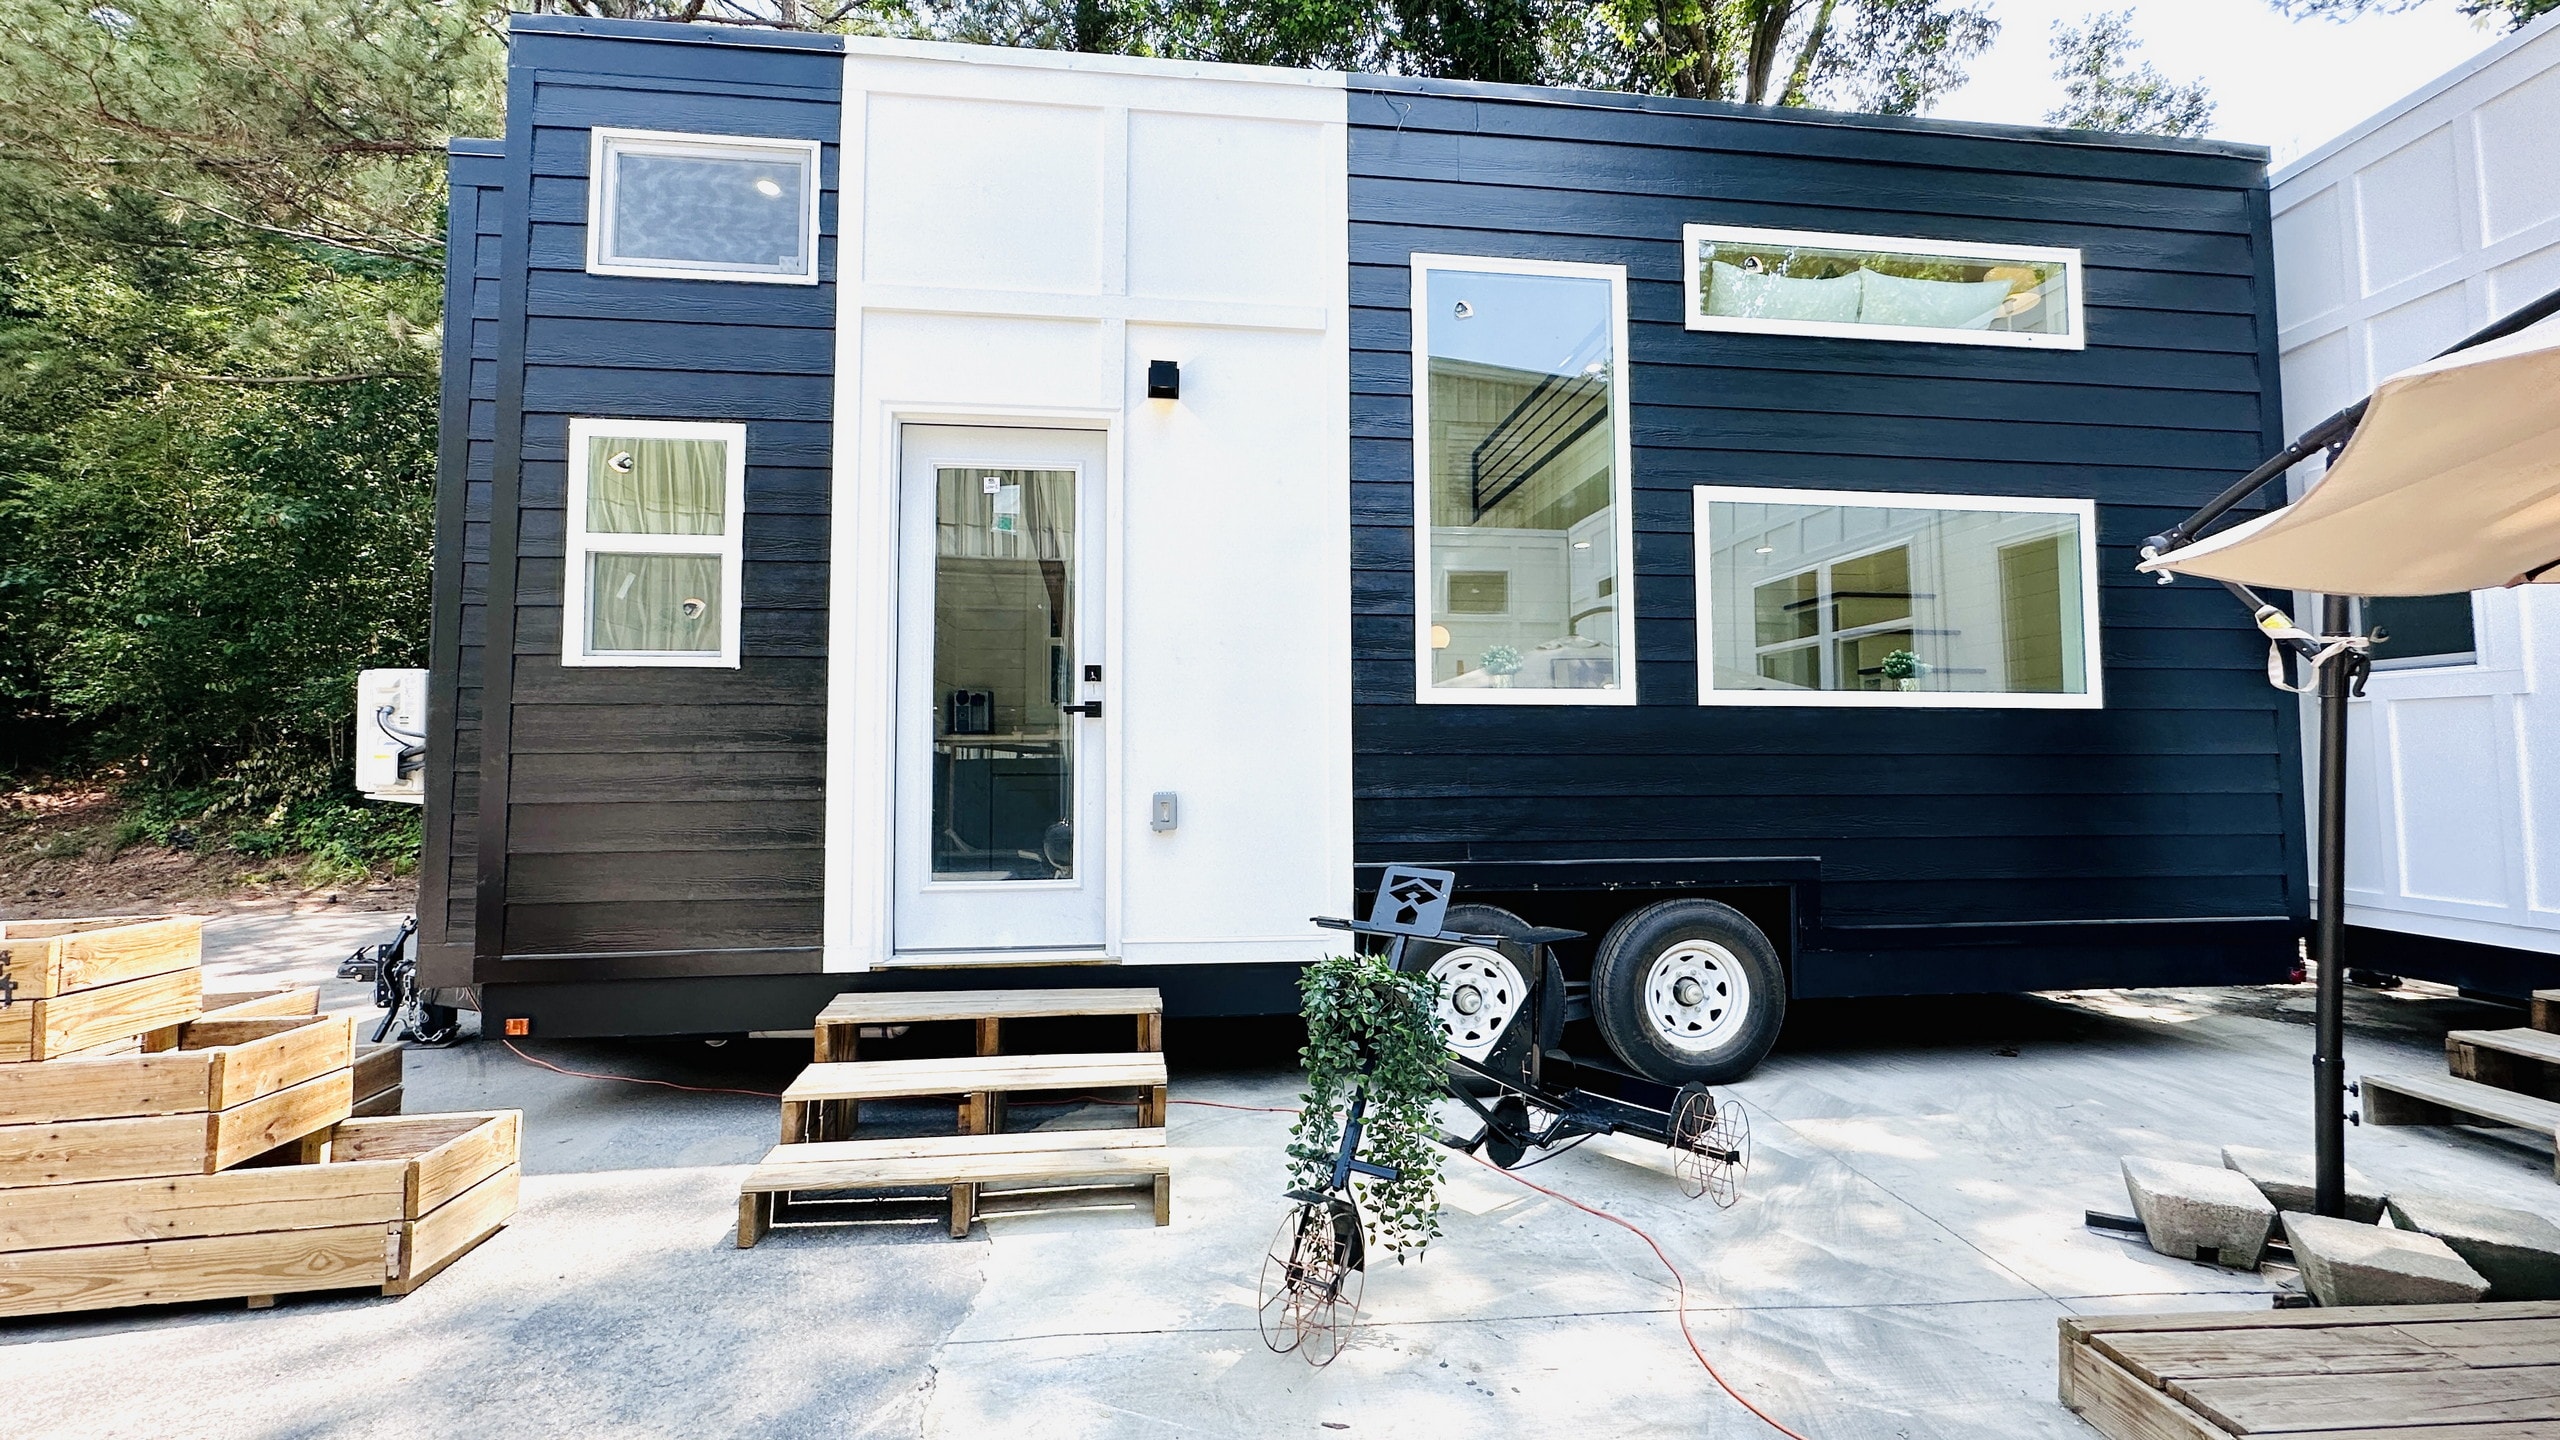 https://s1.cdn.autoevolution.com/images/news/try-not-to-fall-in-love-with-this-expertly-styled-luxury-tiny-home-219843_1.jpg